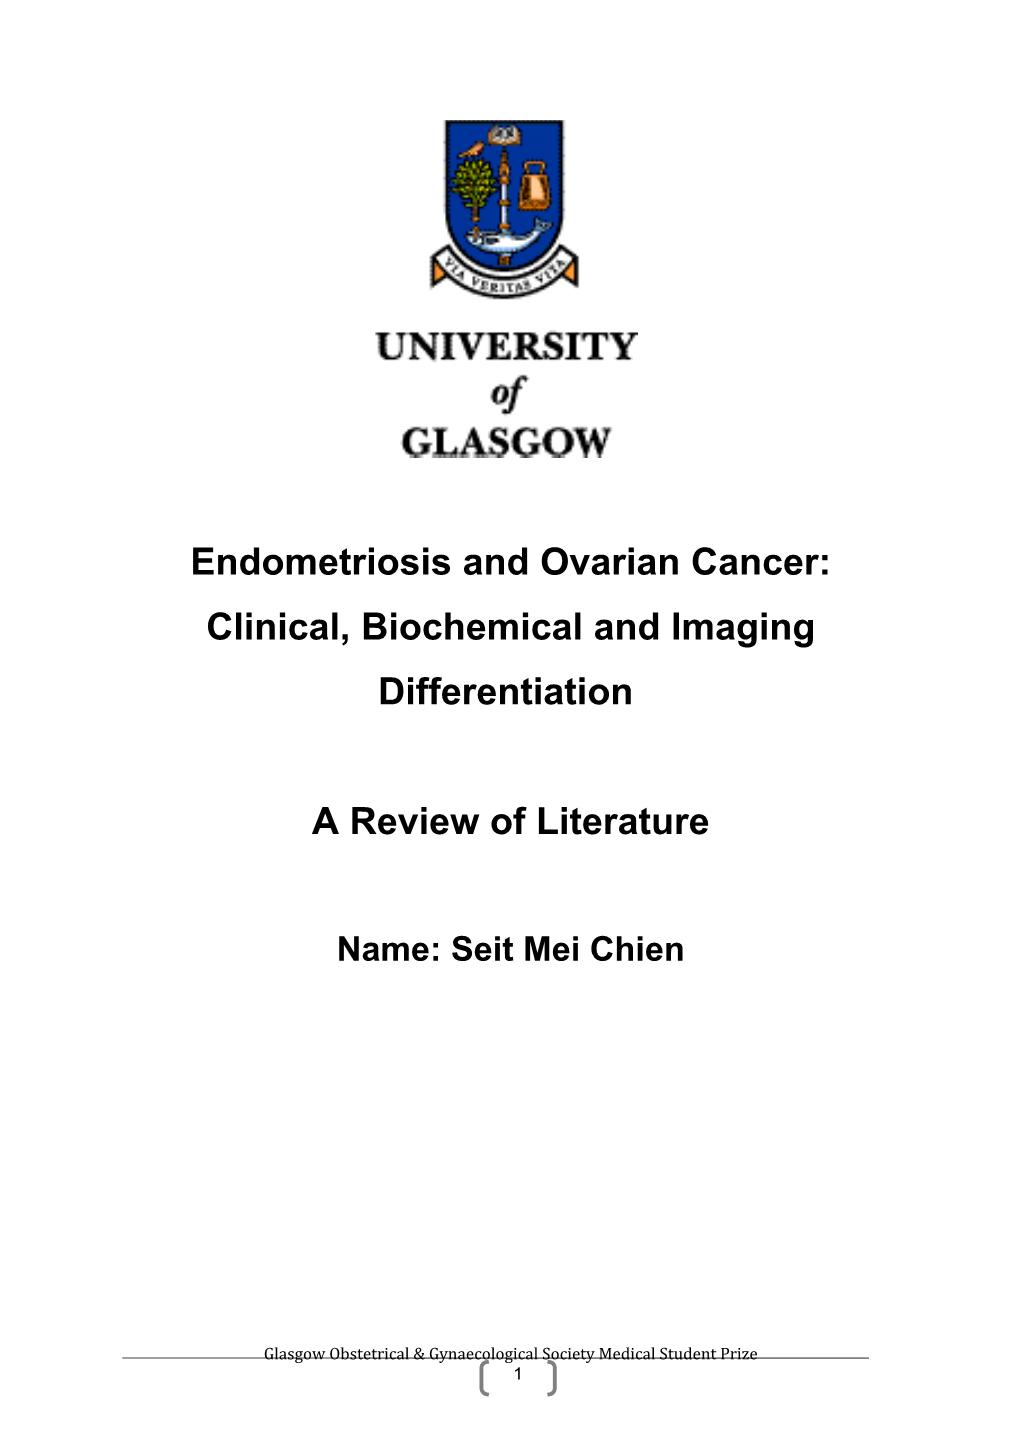 Endometriosis and Ovarian Cancer: Clinical, Biochemical and Imaging Differentiation